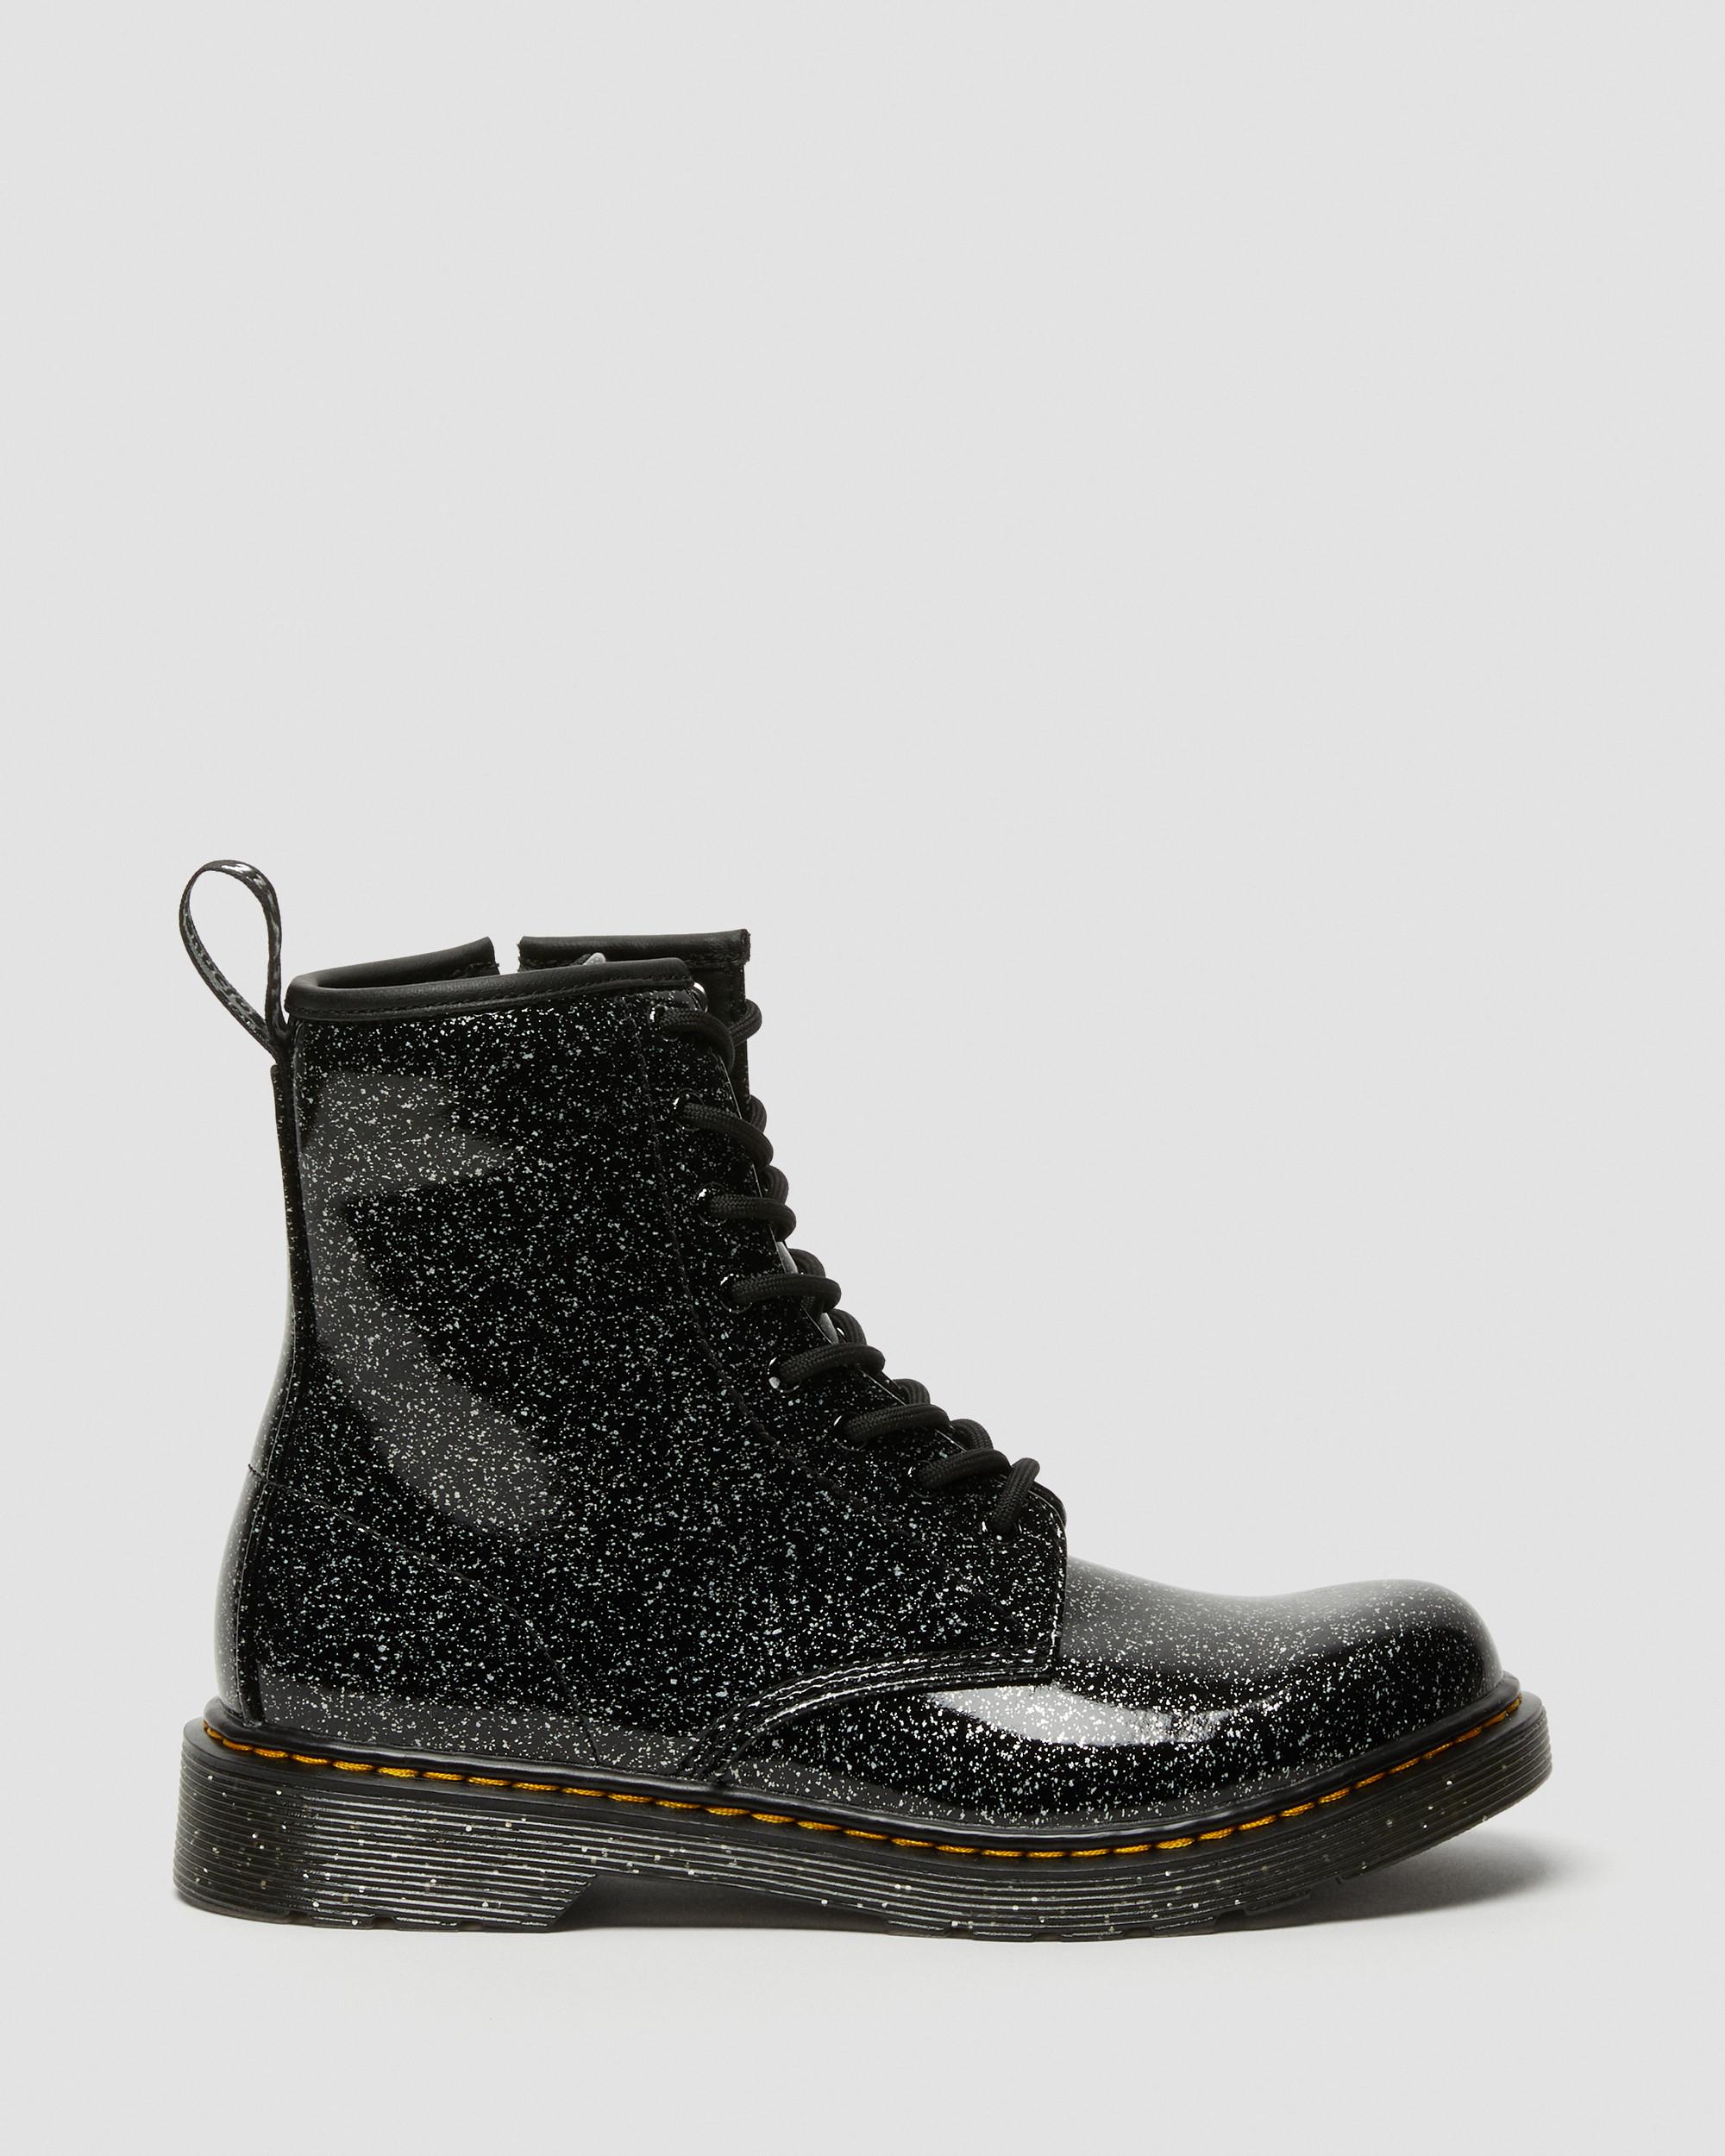 Youth 1460 Glitter Lace Up Dr. Boots Black Martens | in